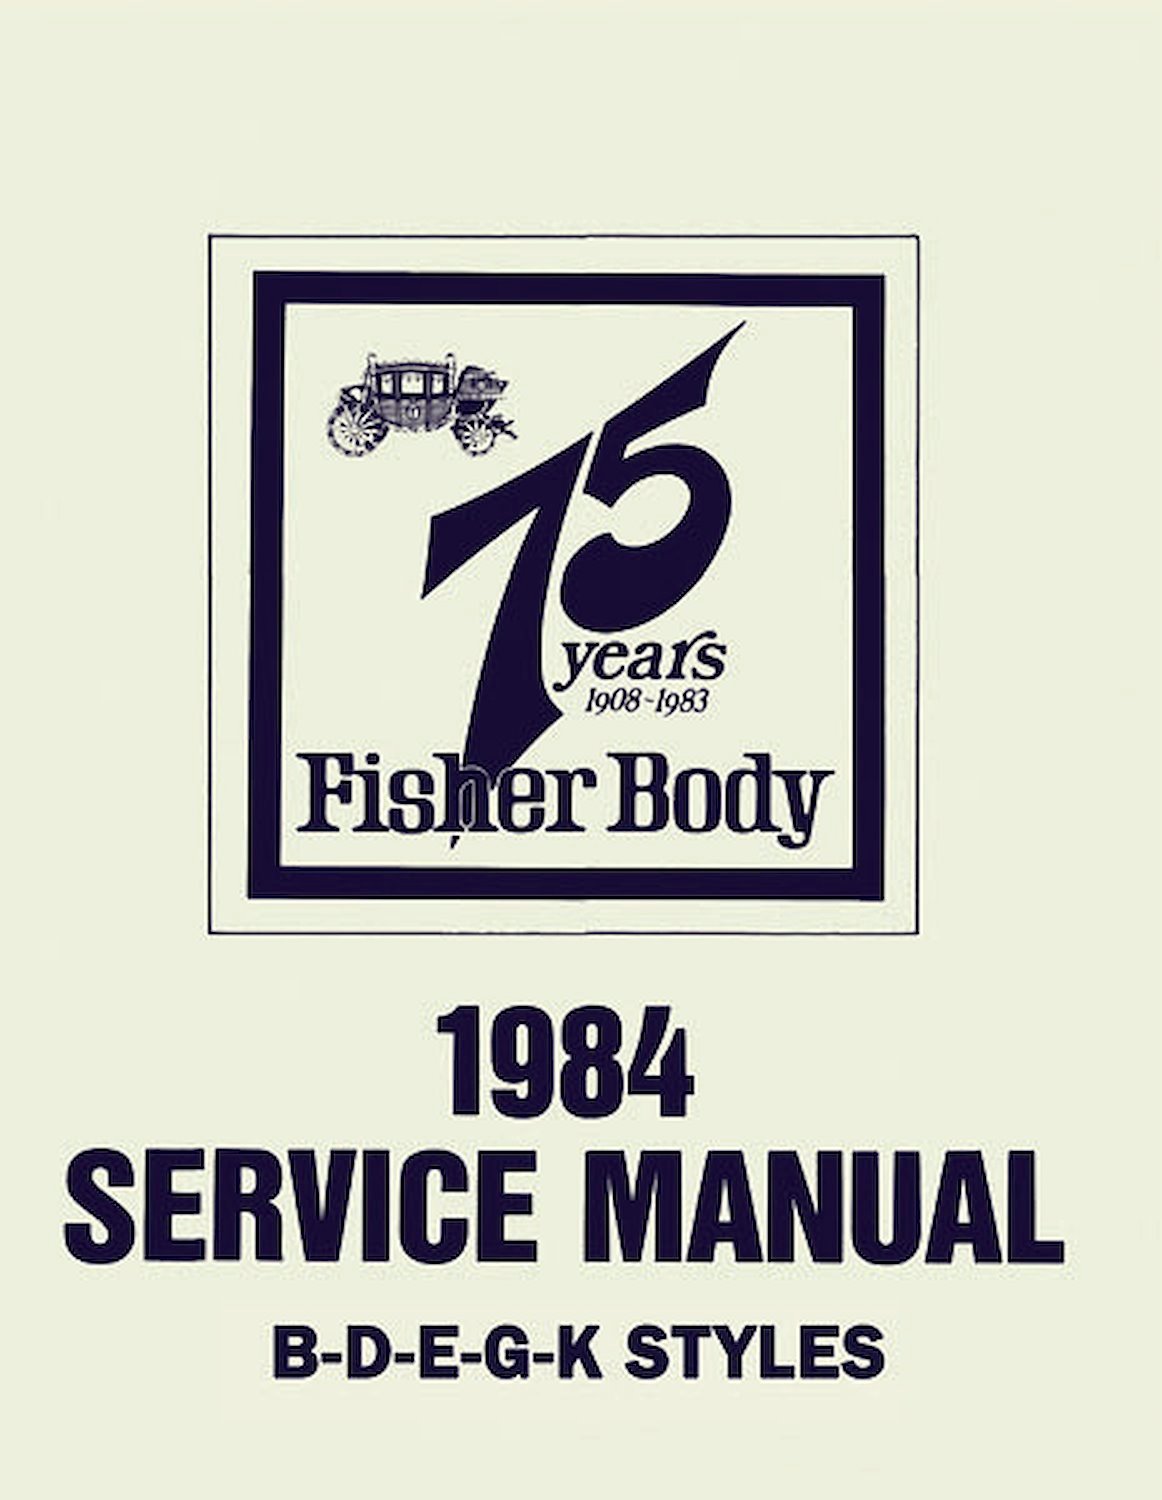 Fisher Body Service Manual for 1984 Buick, Cadillac, Chevrolet, GMC, Oldsmobile and Pontiac Models, B-D-E-G-K Body Styles